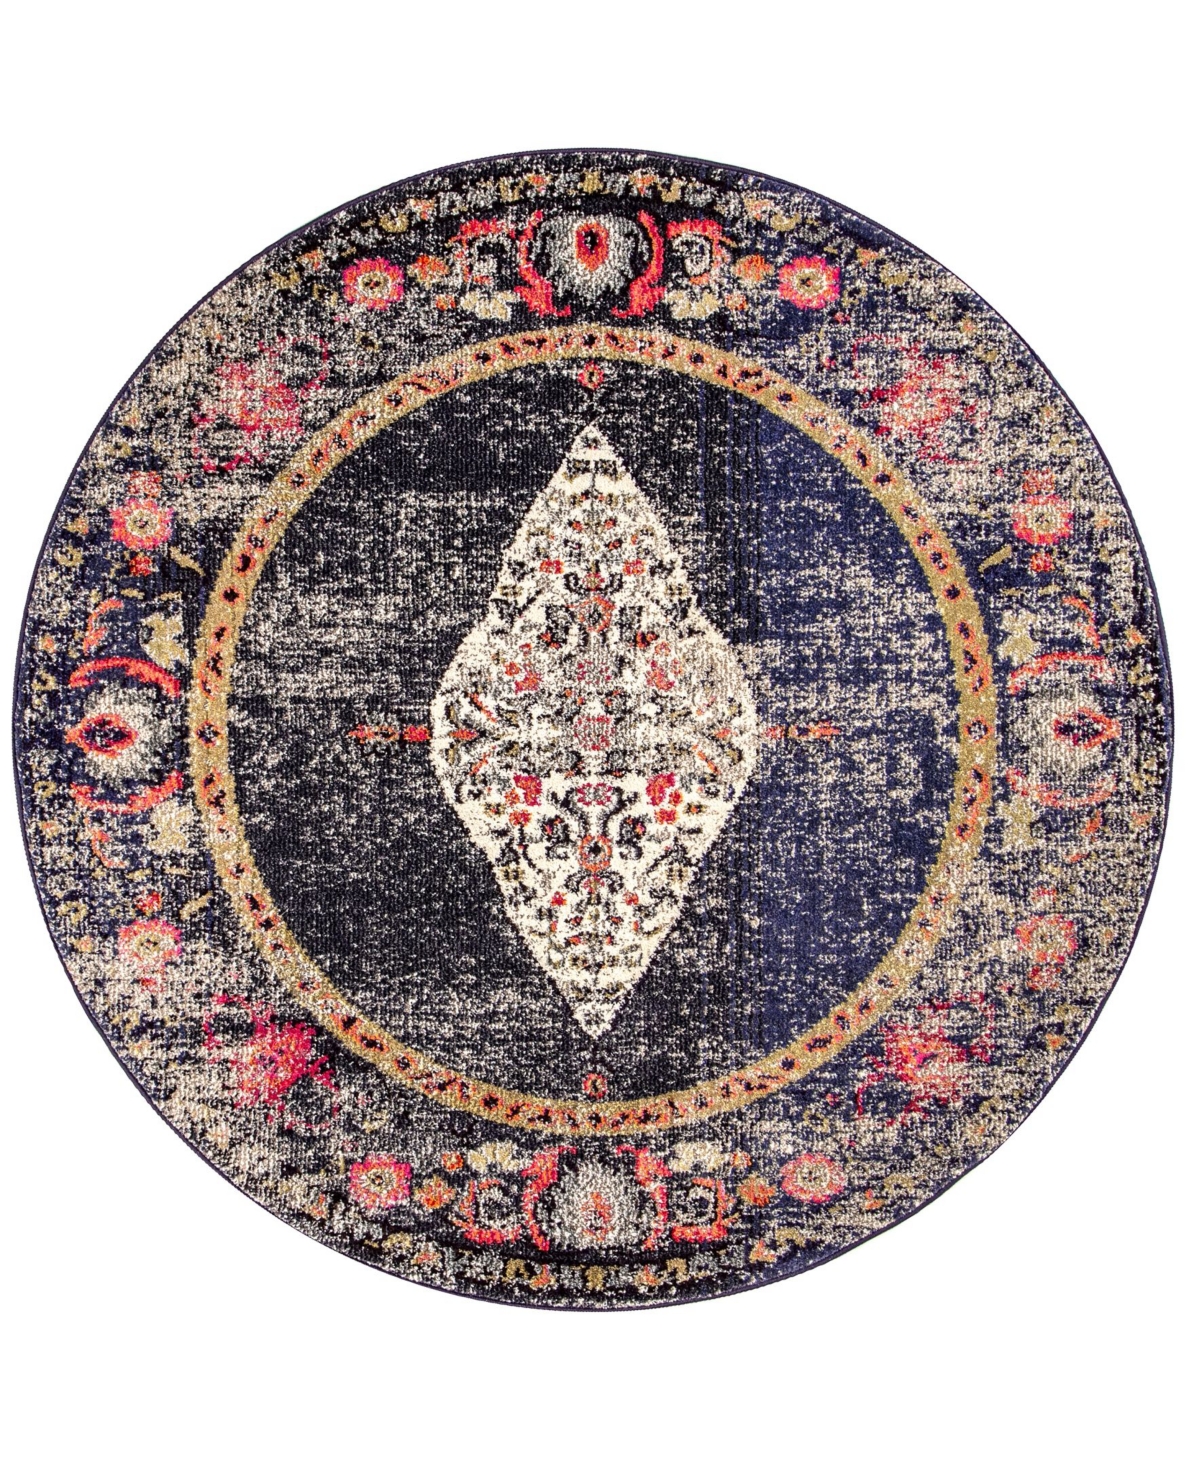 nuLoom Veronica 7'10in x 7'10in Round Area Rug - Navy